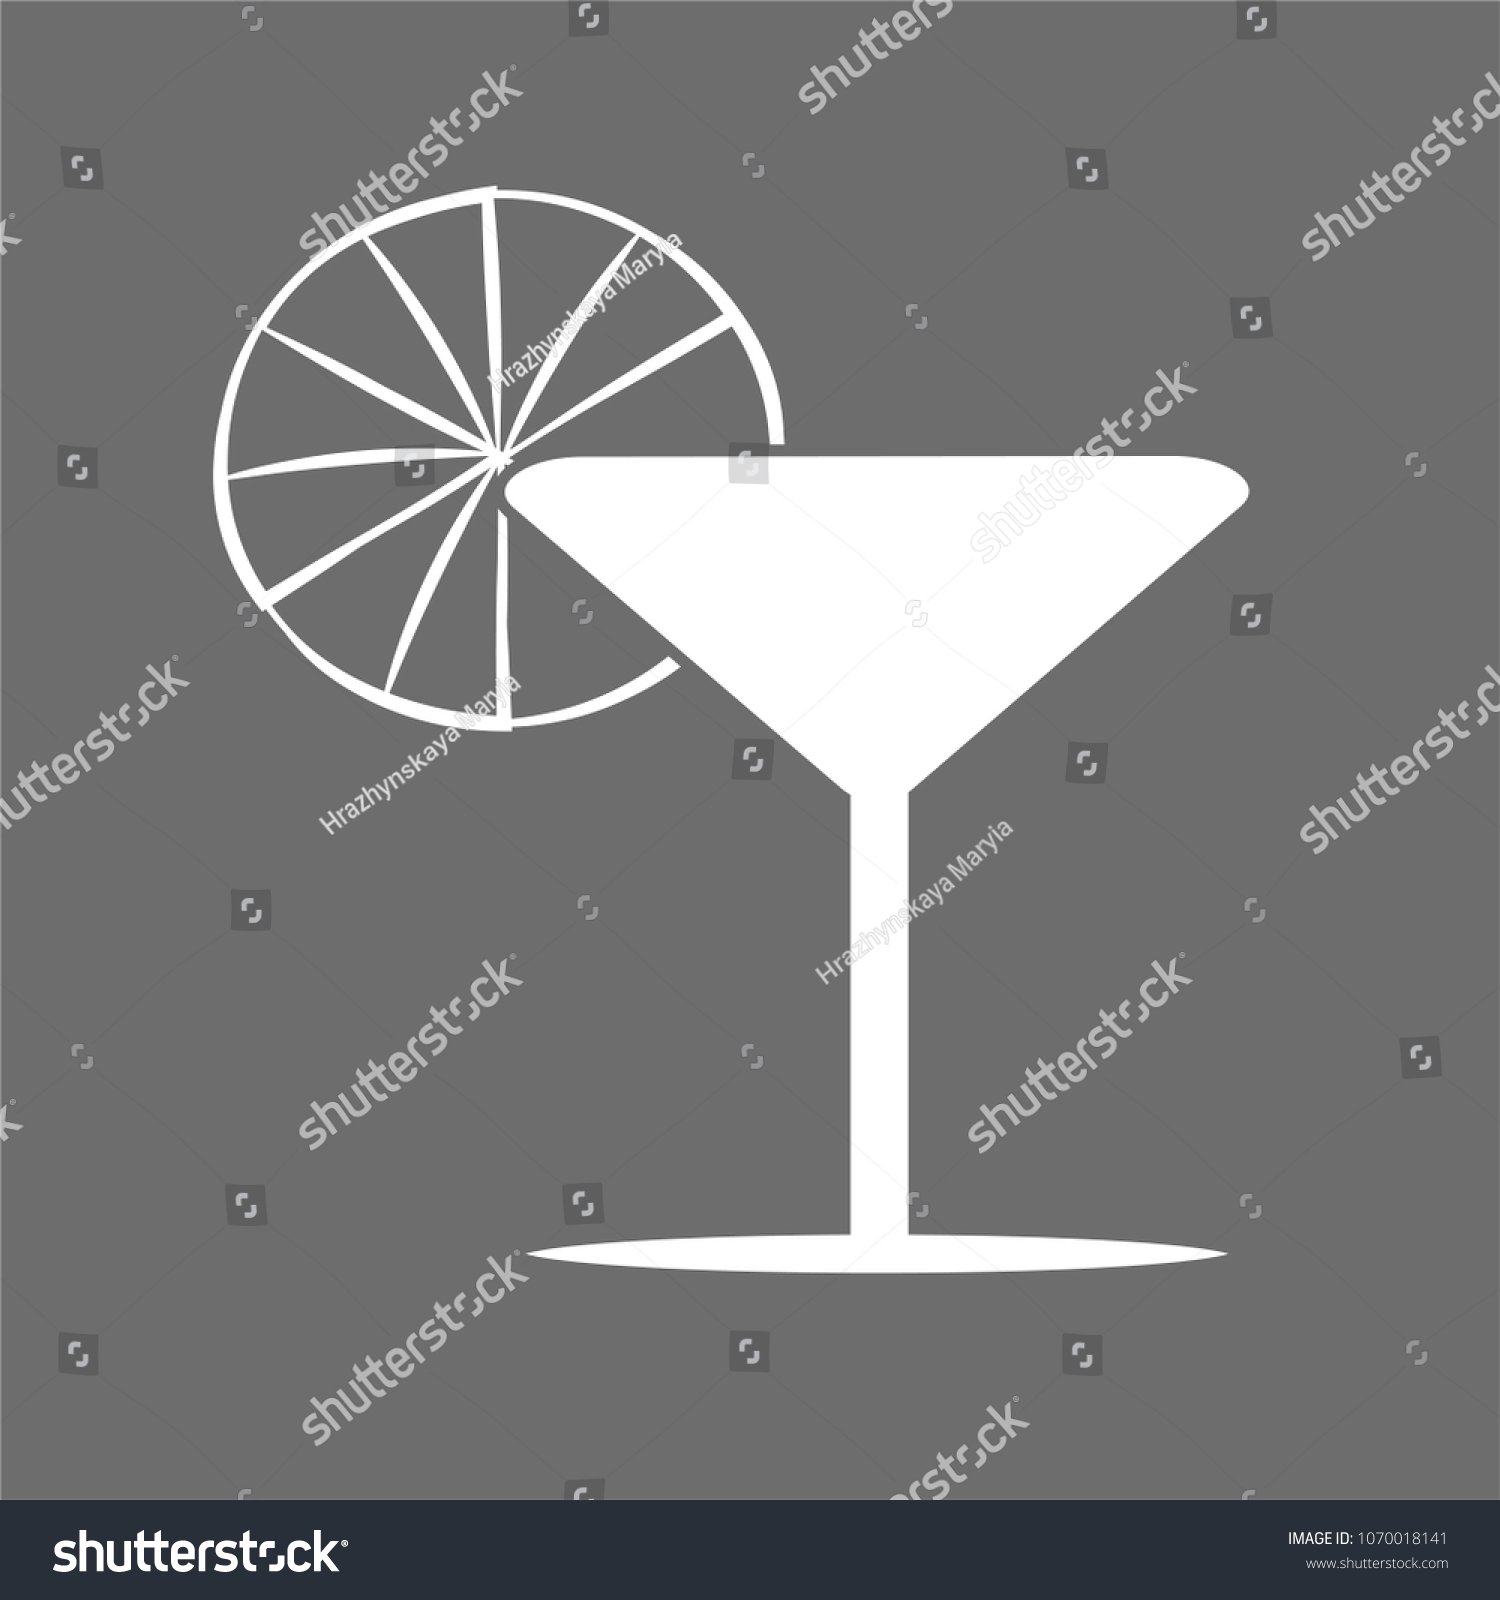 glass martini icon with fruit #1070018141